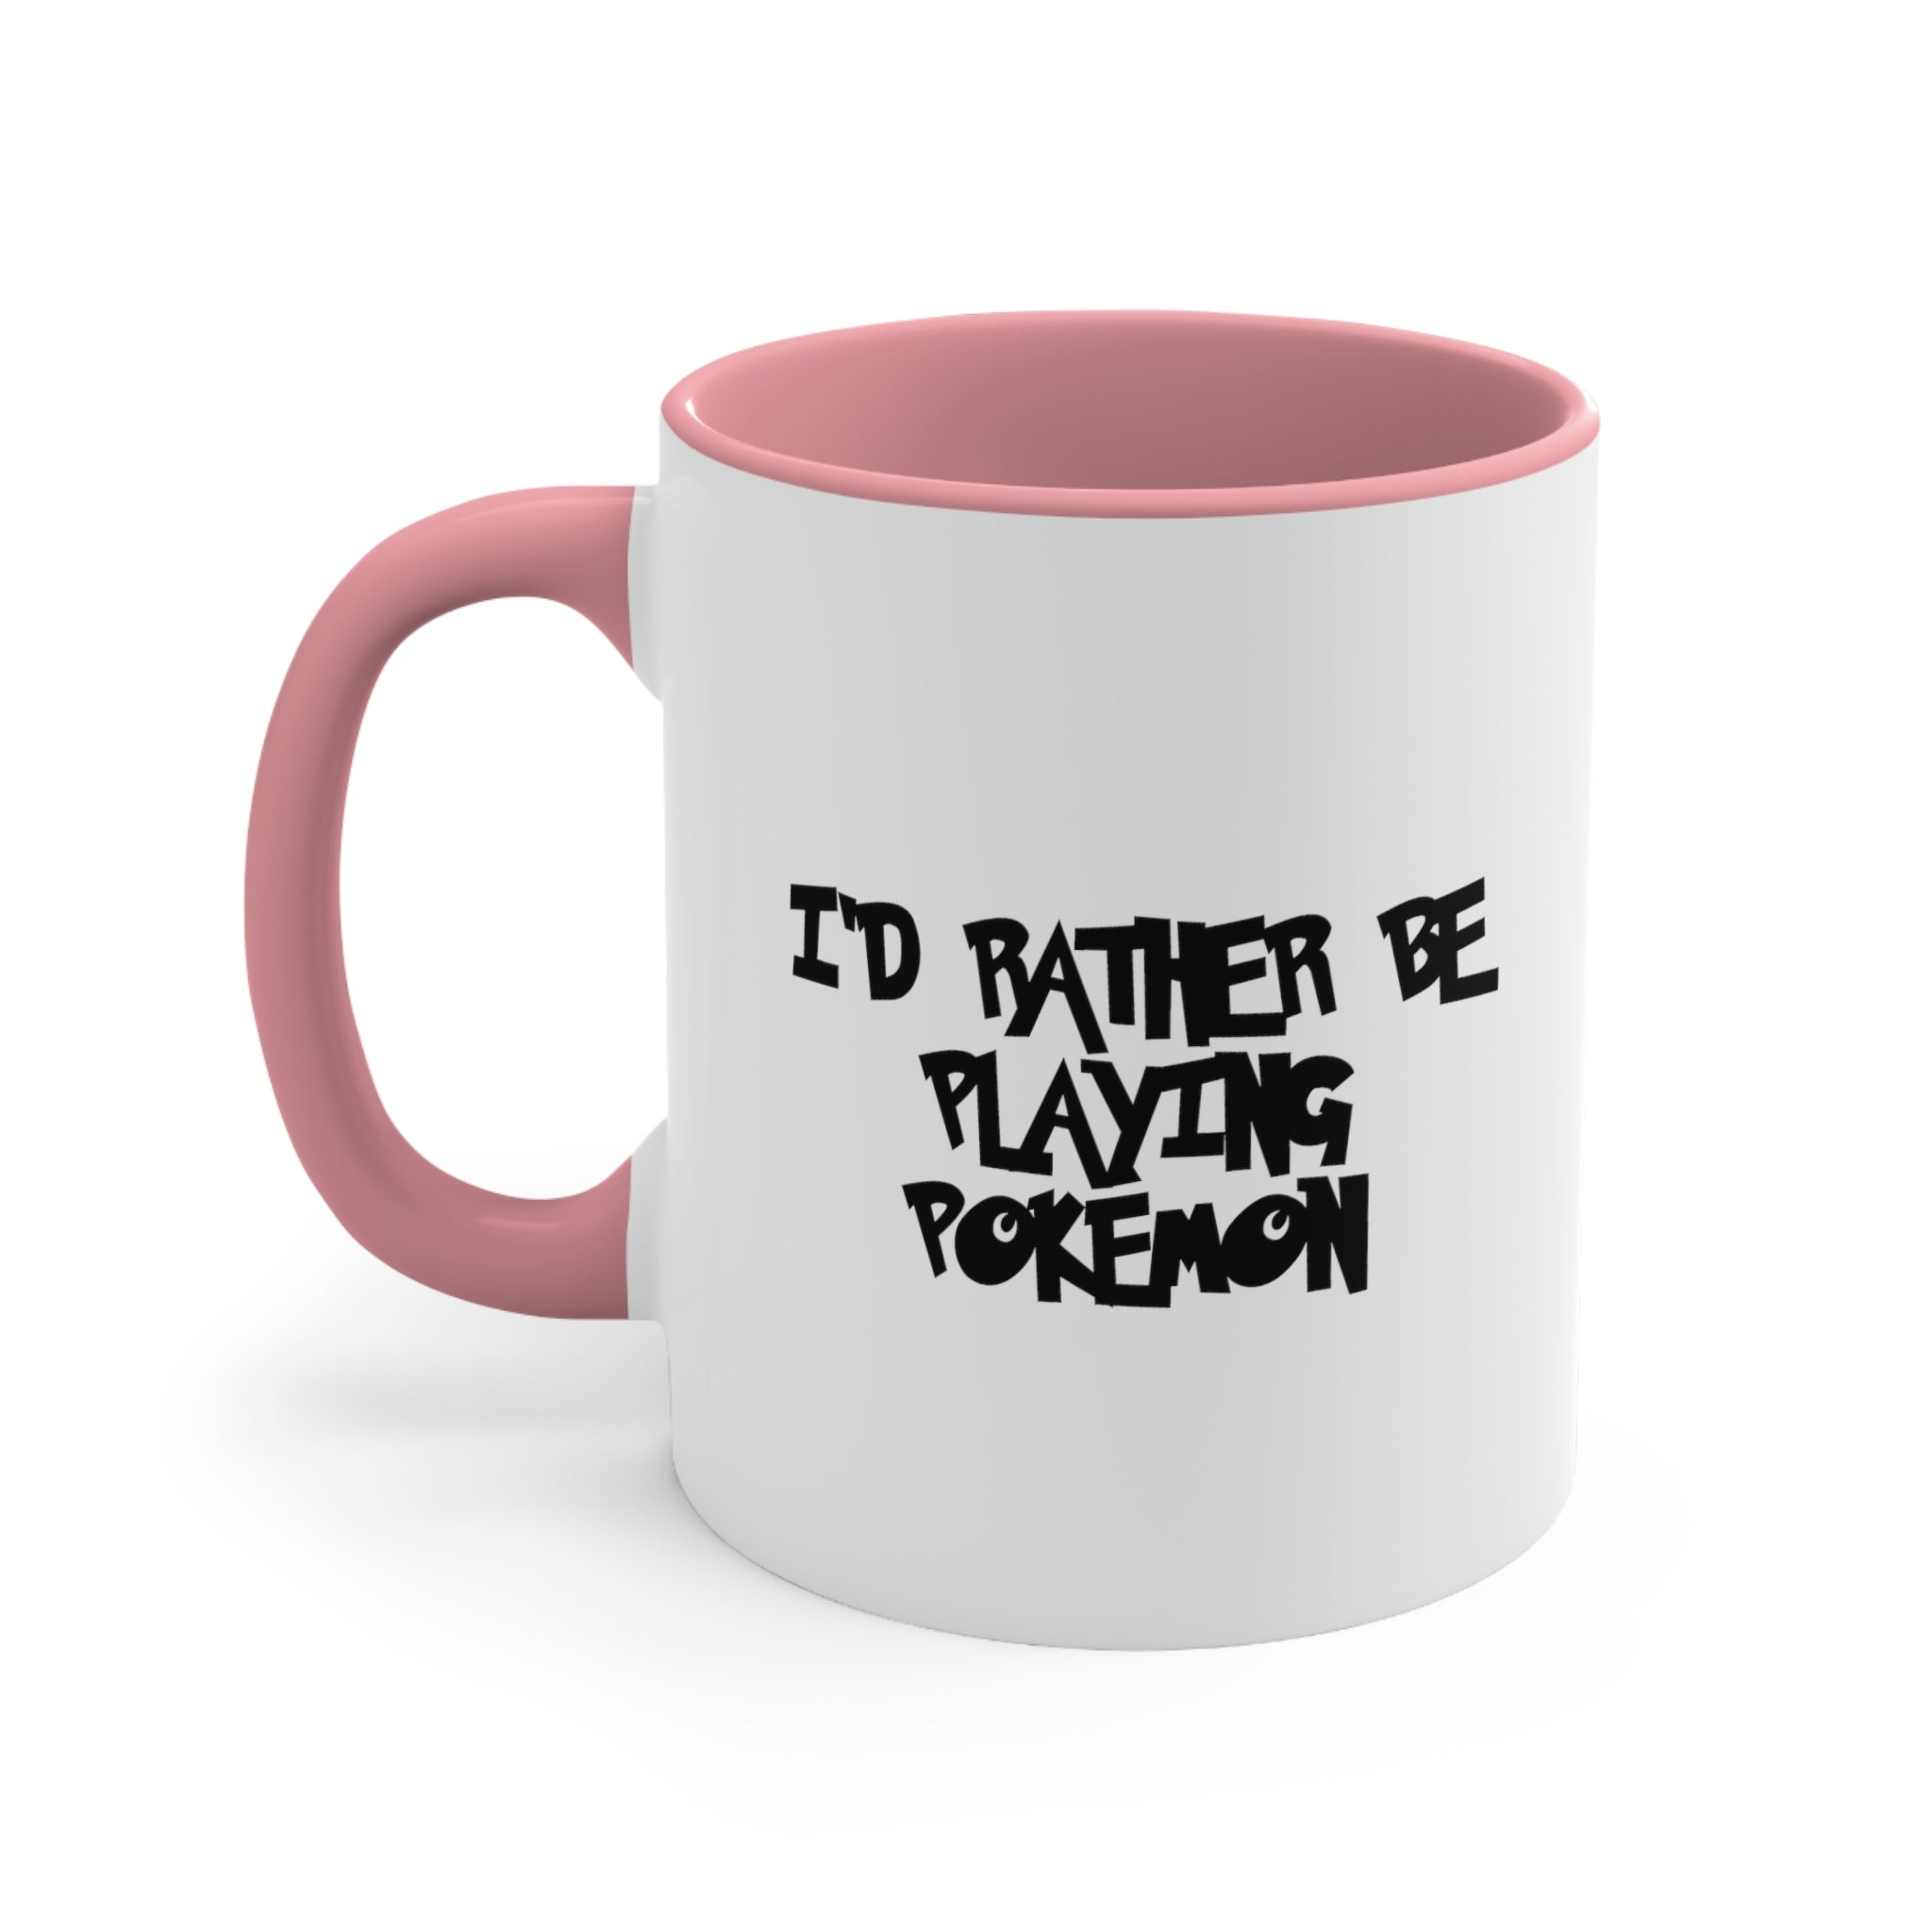 Poke mon I'd Rather Be Playing Coffee Mug, 11oz Shirt Tshirt T-shirt Gamer Gift For Him Her Game Cup Cups Mugs Birthday Christmas Valentine's Anniversary Gifts